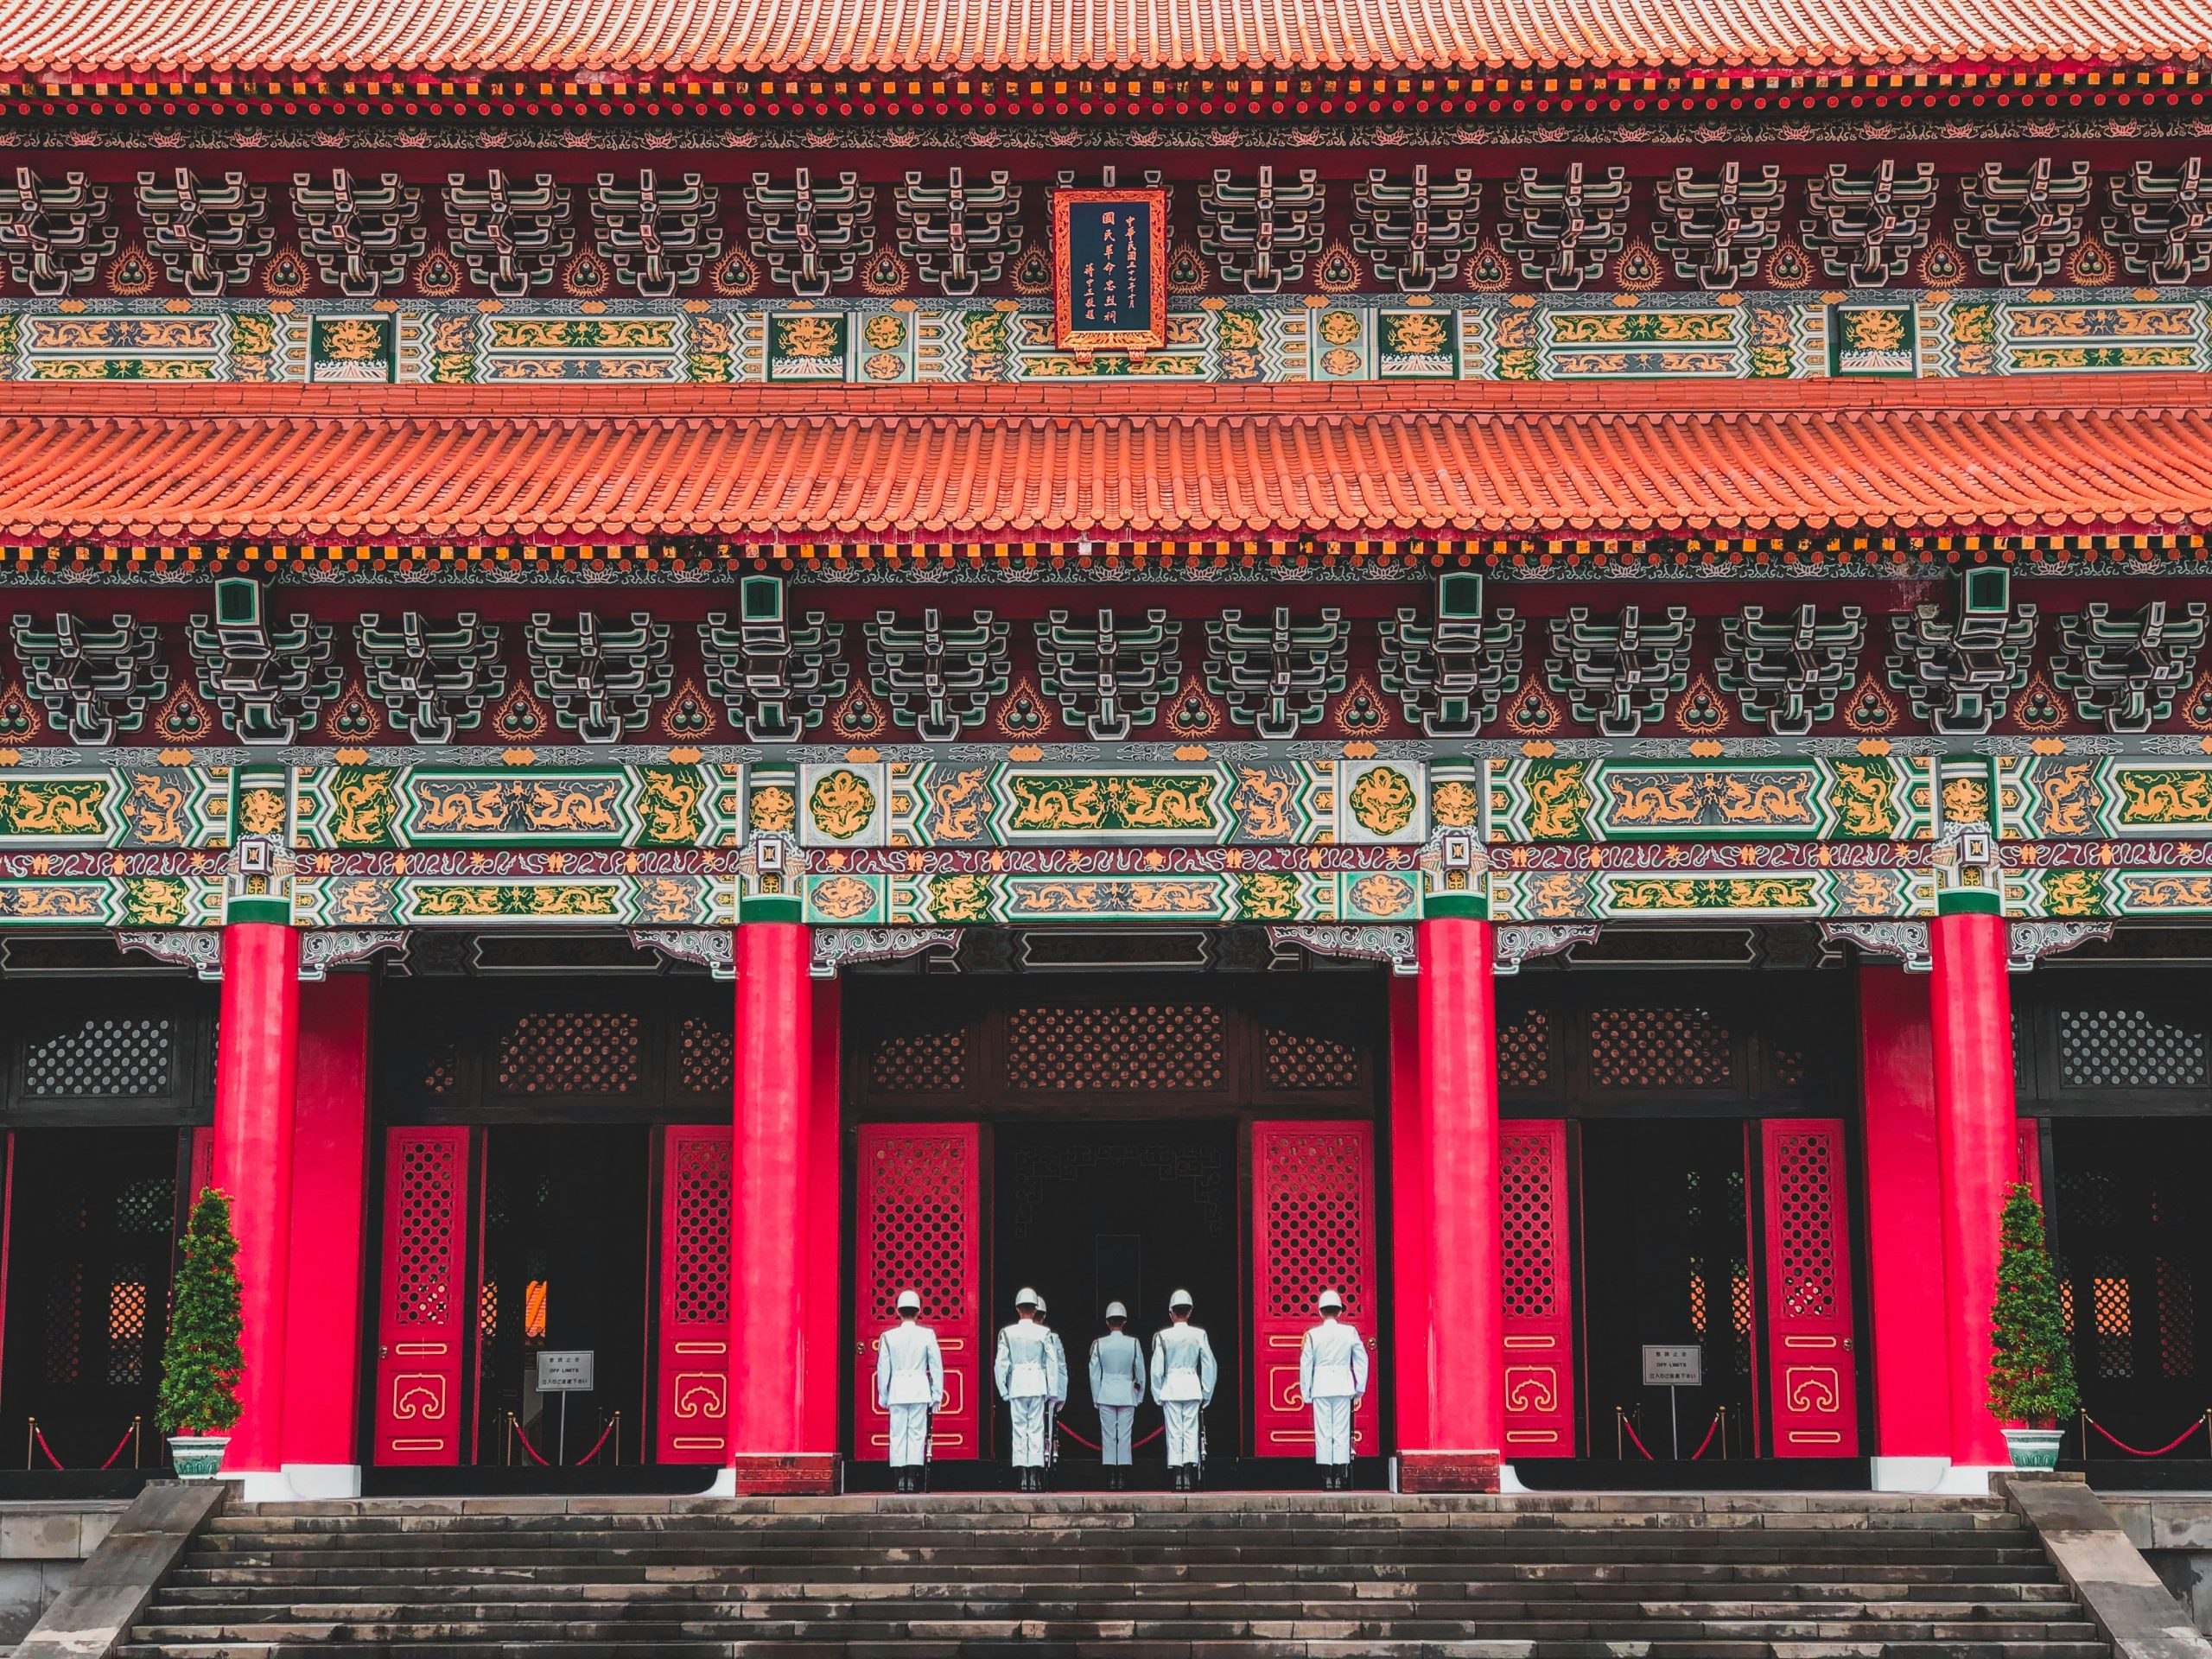 explore the significance and diverse expressions of cultural heritage across the world with our thought-provoking content and engaging experiences.